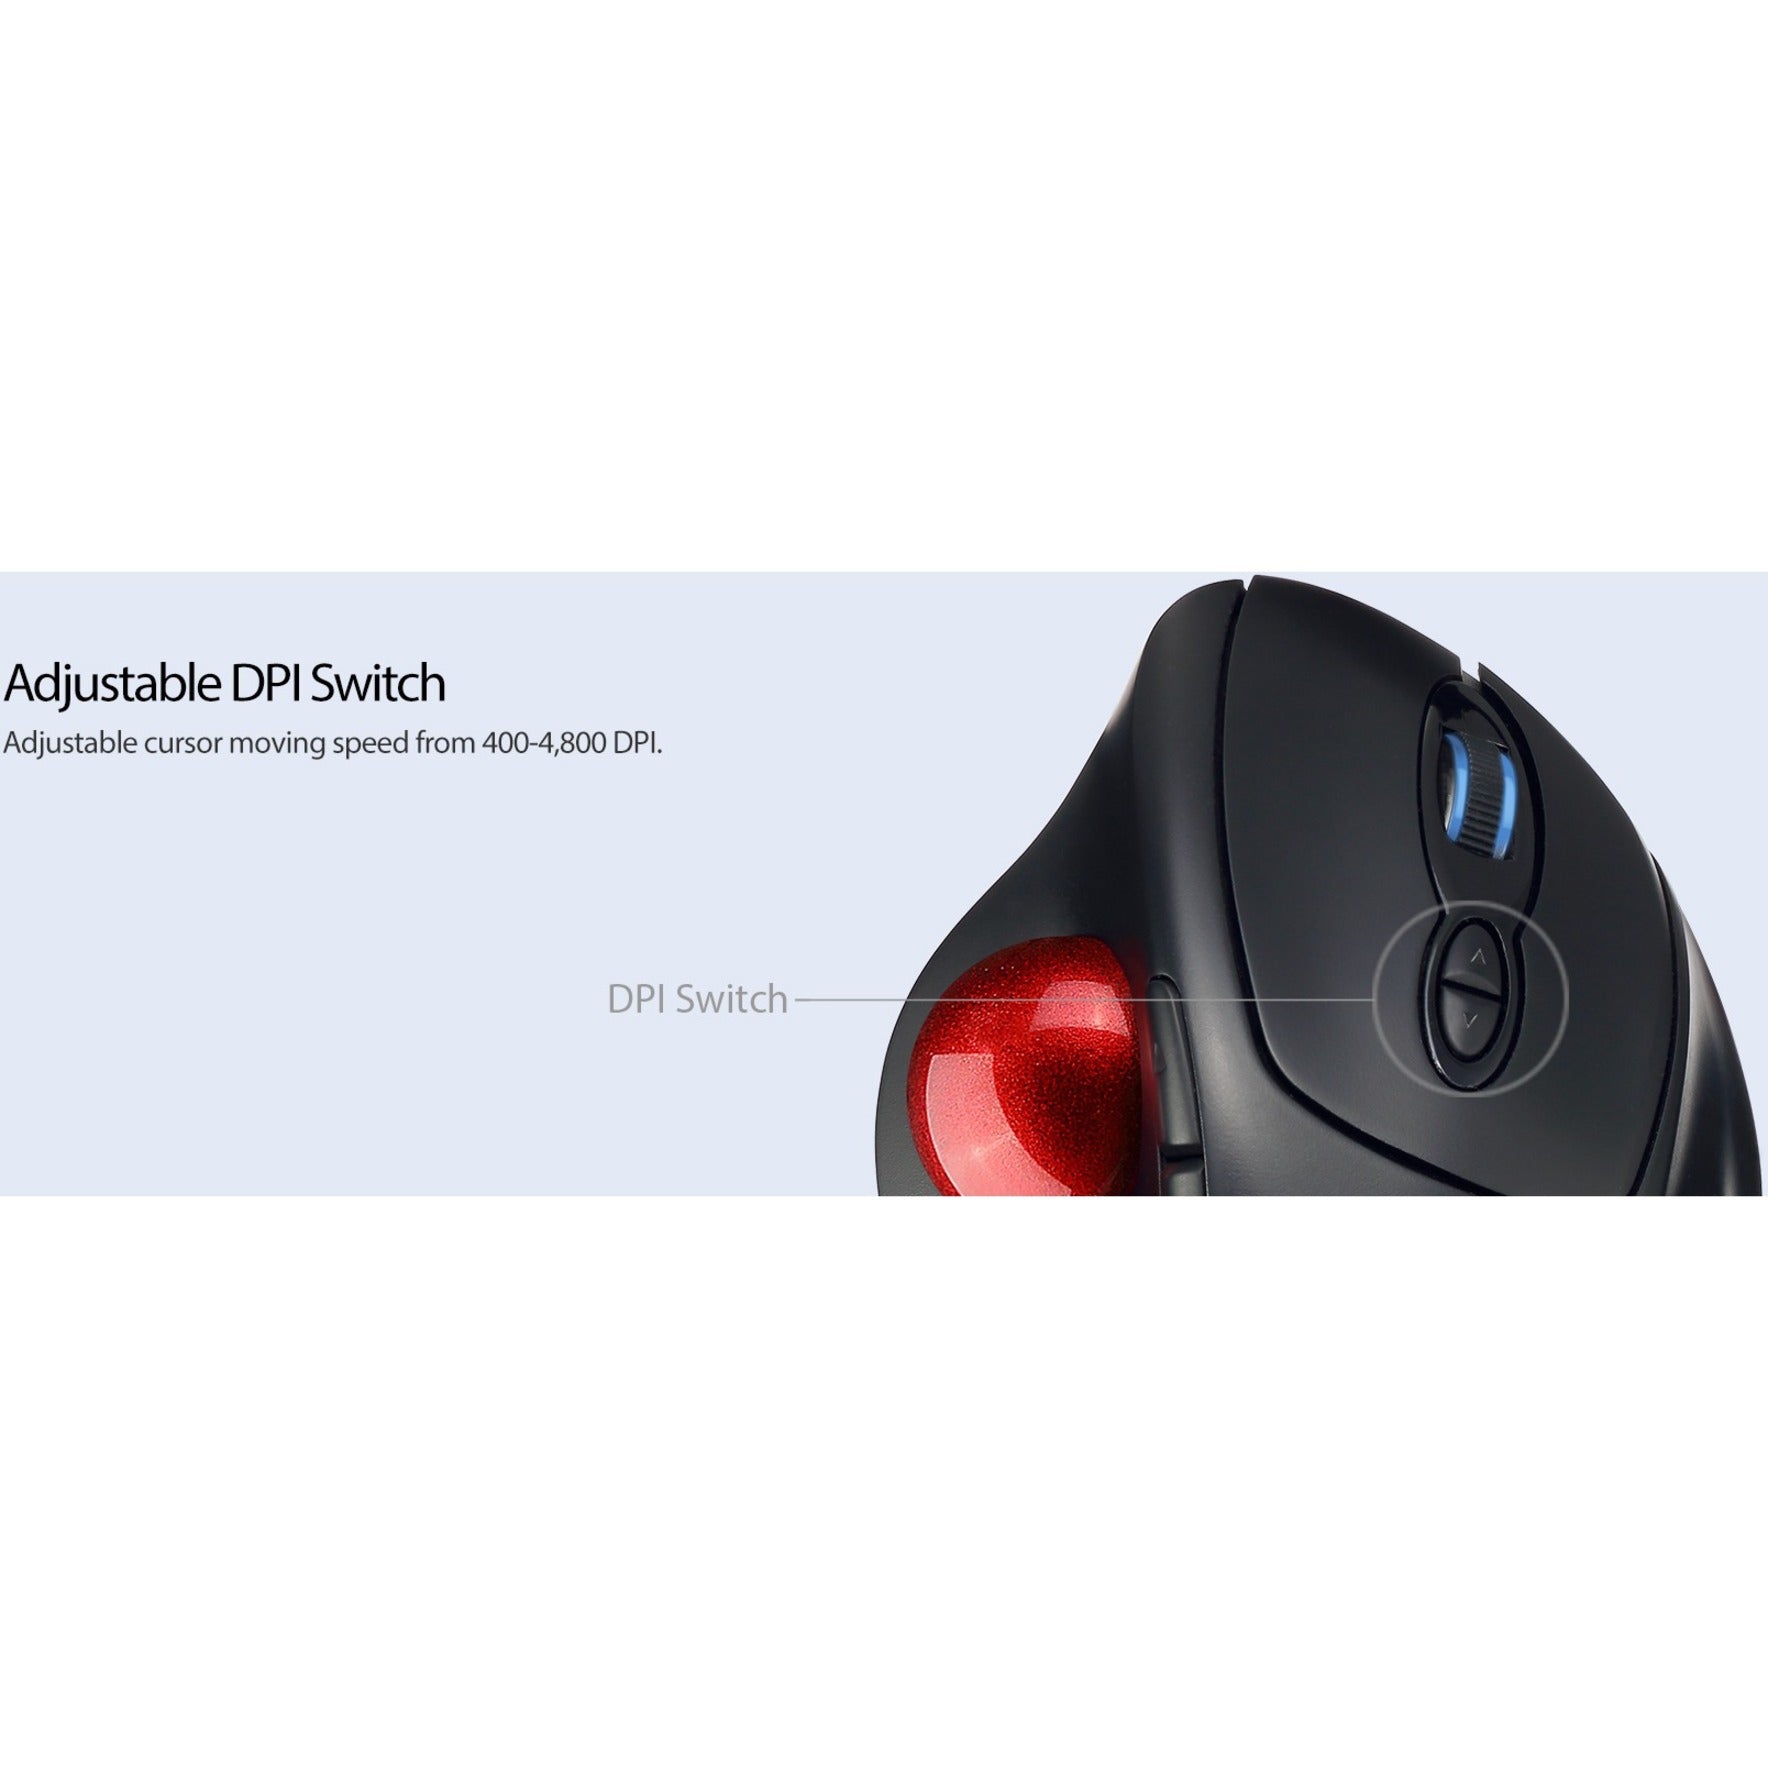 Adesso IMOUSE T30 Wireless Programmable Ergonomic Trackball Mouse, 7 Buttons, 4800 DPI